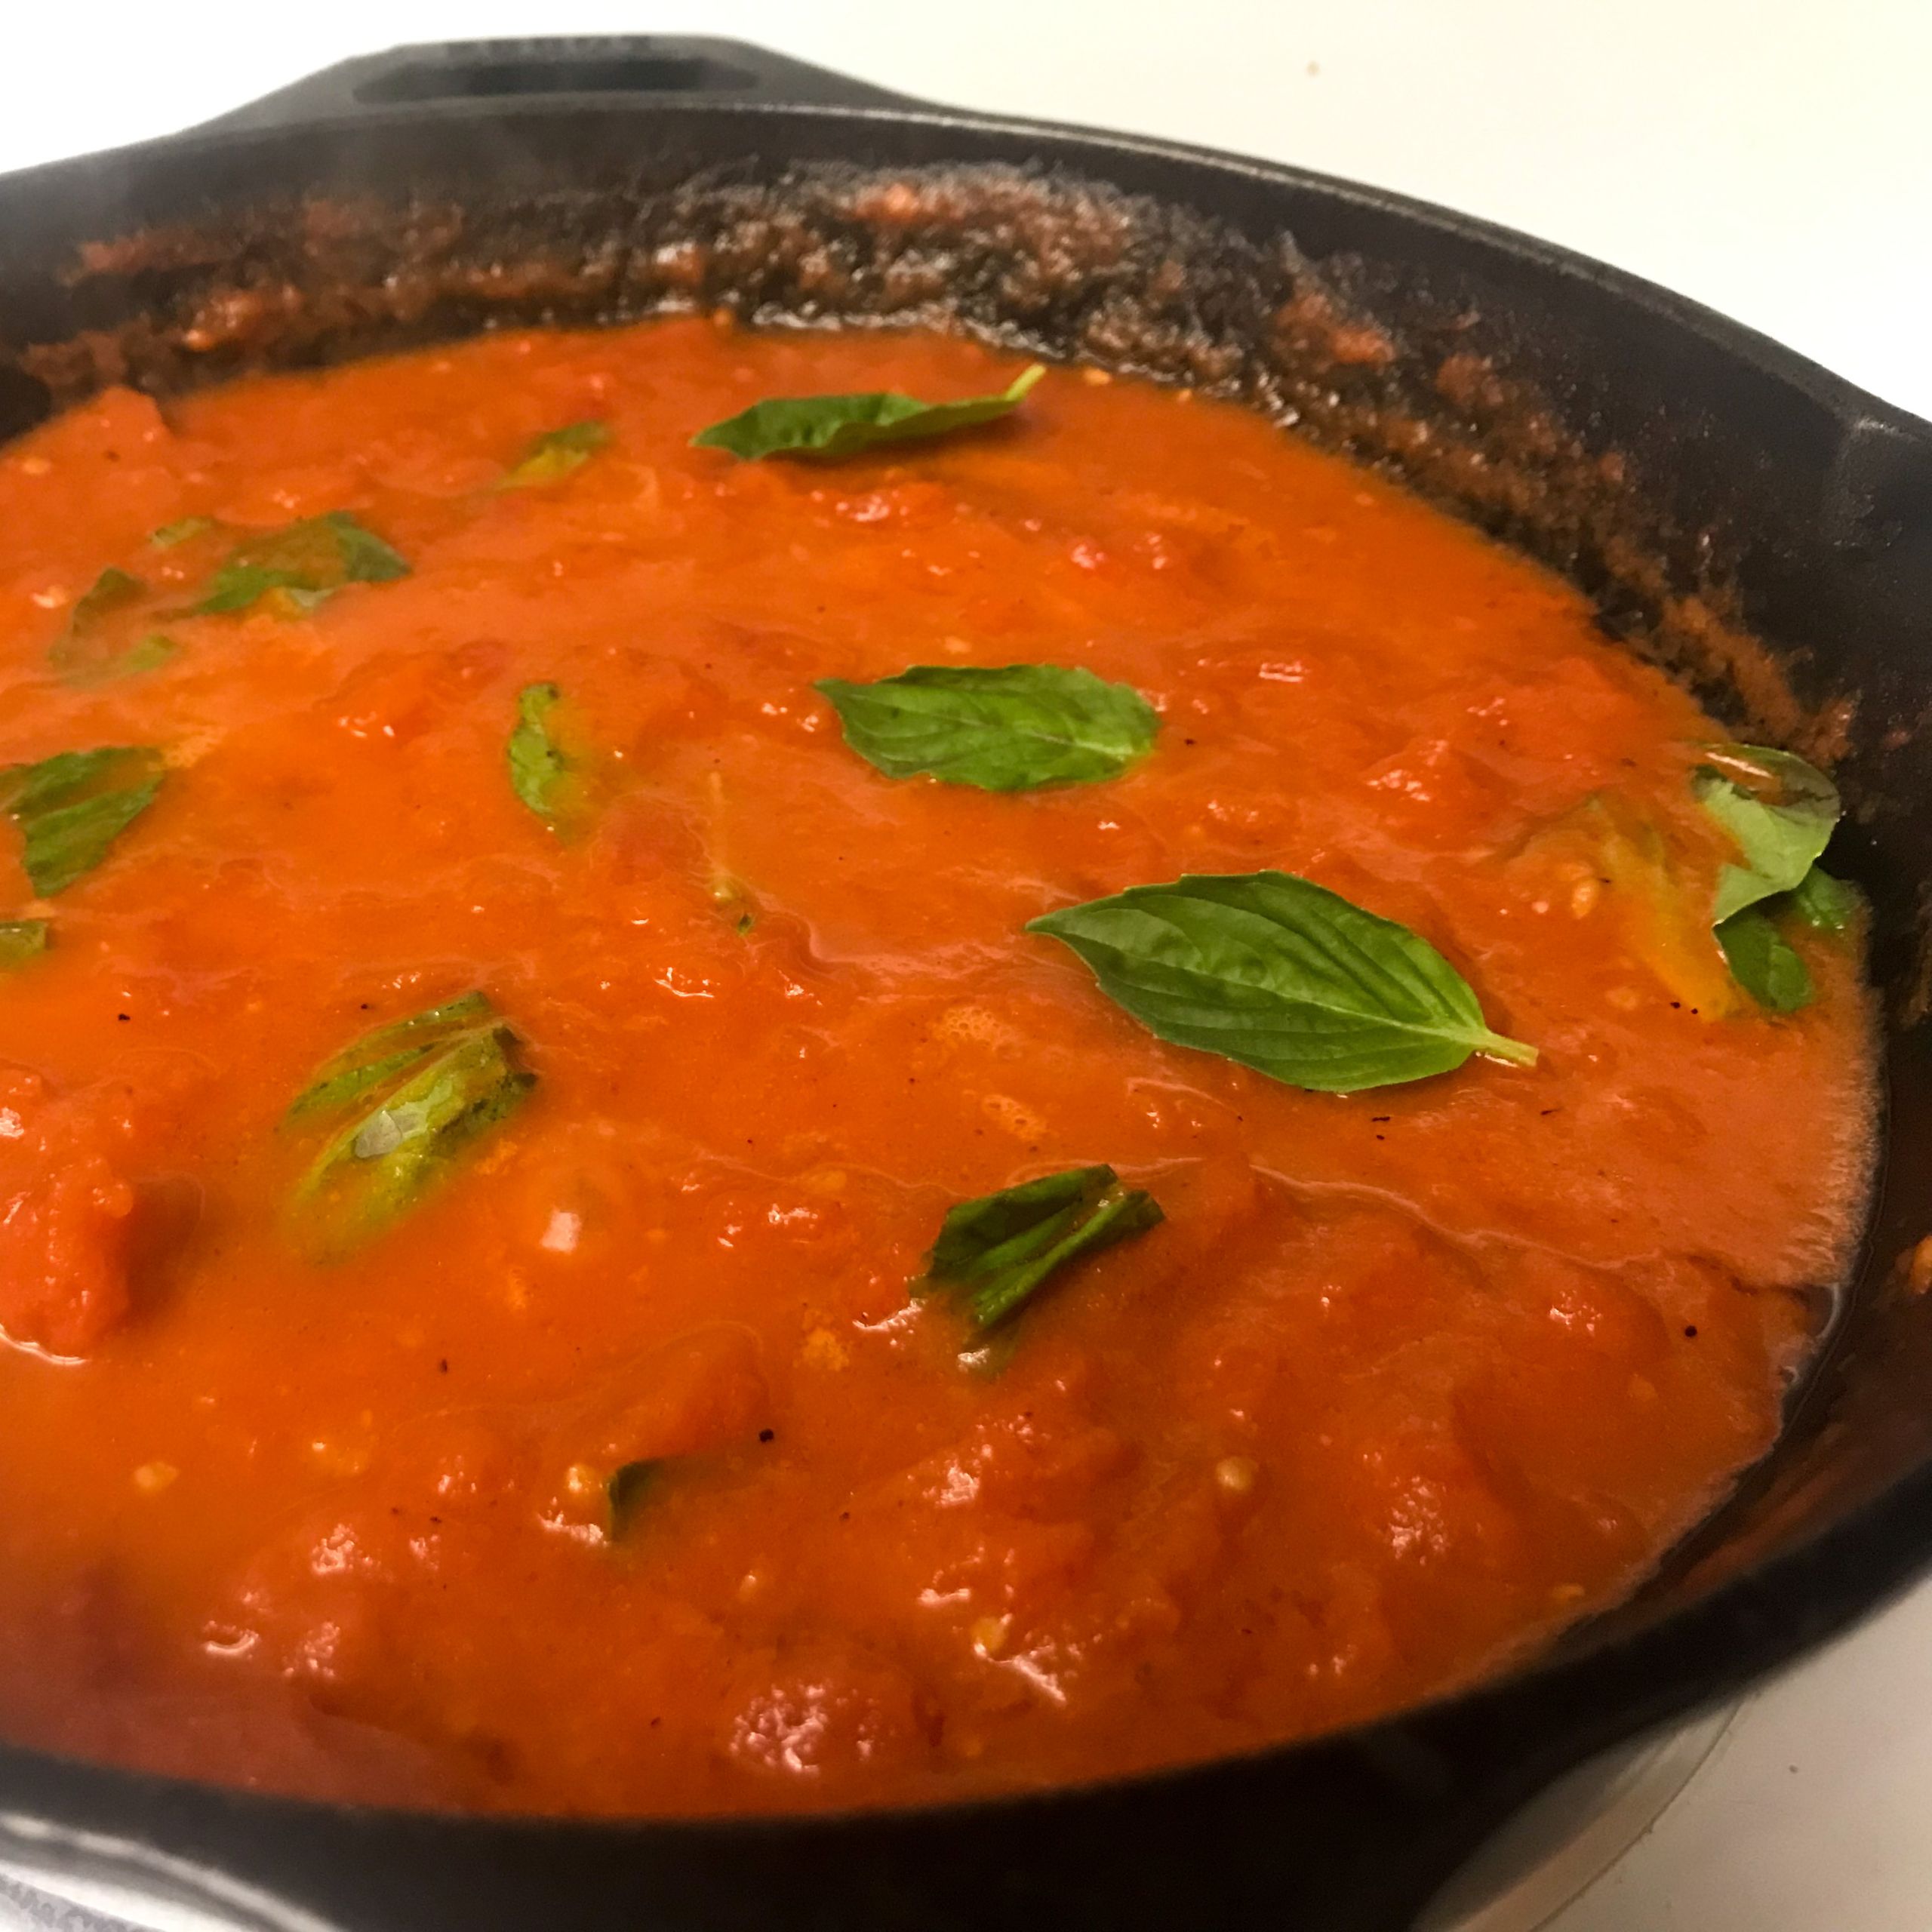 tomatoes and basil simmering on stove